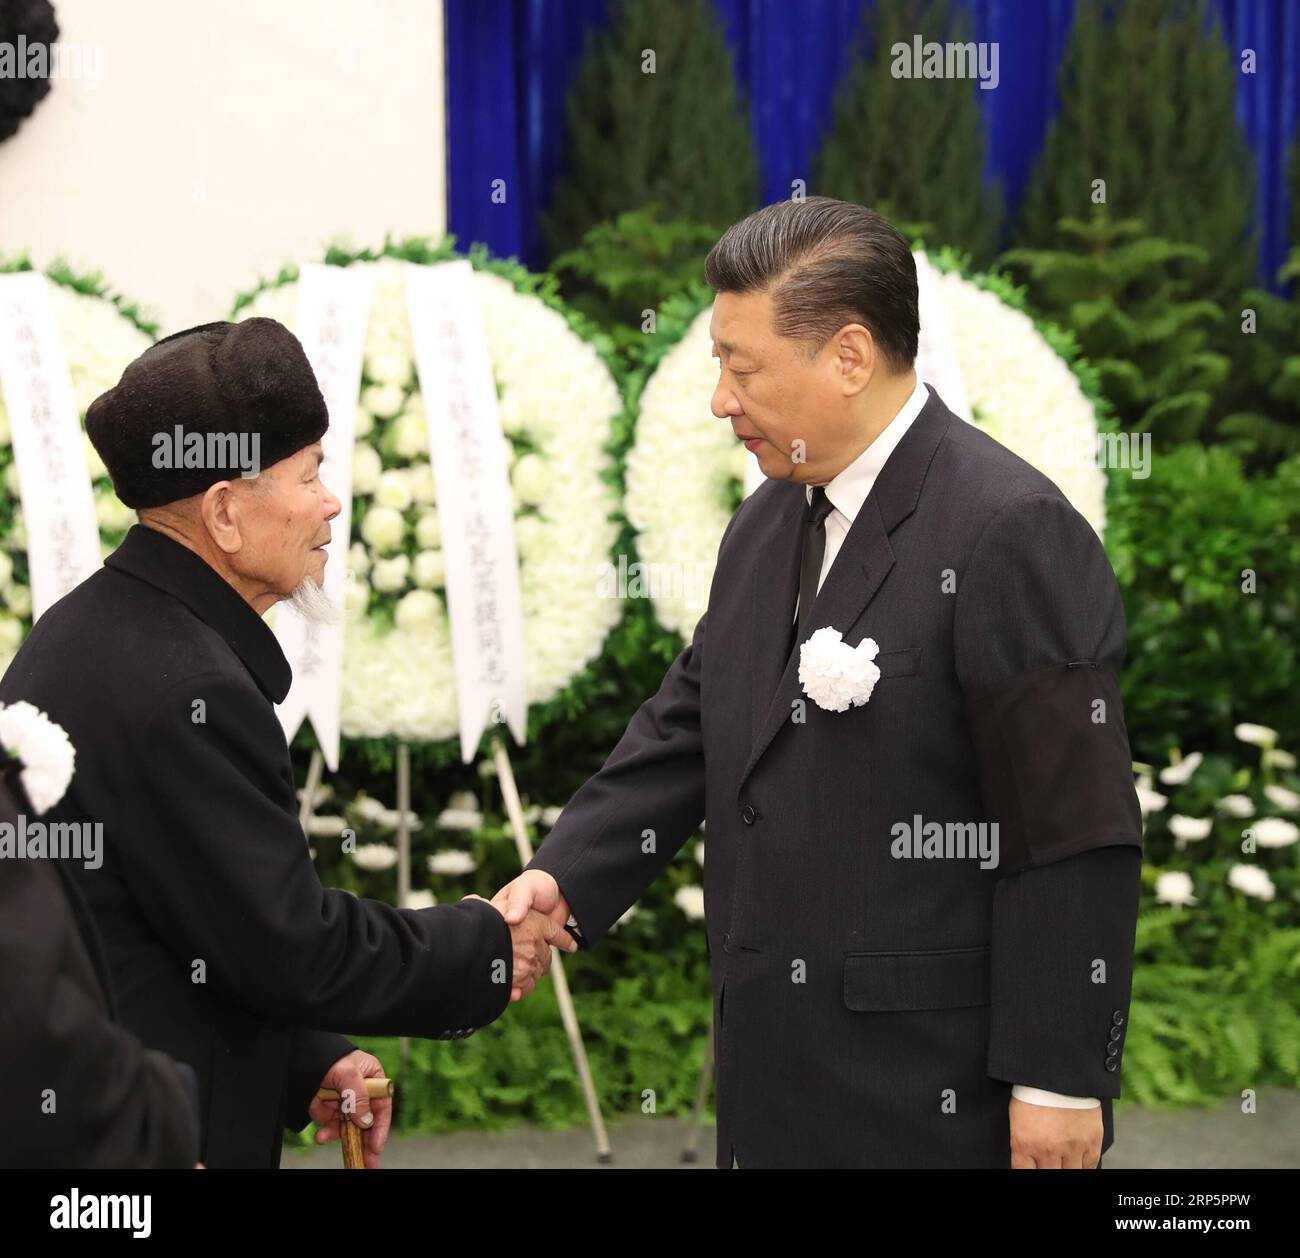 (181221) -- BEIJING, Dec. 21, 2018 -- Chinese President Xi Jinping (R) shakes hands with a family member of Tomur Dawamat, former vice chairman of the National People s Congress (NPC) Standing Committee, at the funeral of Dawamat at the Babaoshan Revolutionary Cemetery in Beijing, capital of China, Dec. 21, 2018. Dawamat died at the age of 92 on Dec. 19 in Beijing. Xi Jinping, Li Keqiang, Li Zhanshu, Wang Yang, Wang Huning, Zhao Leji, Han Zheng and Wang Qishan as well as other senior officials paid their final respects at the service at Babaoshan Revolutionary Cemetery in Beijing on Friday. ) Stock Photo